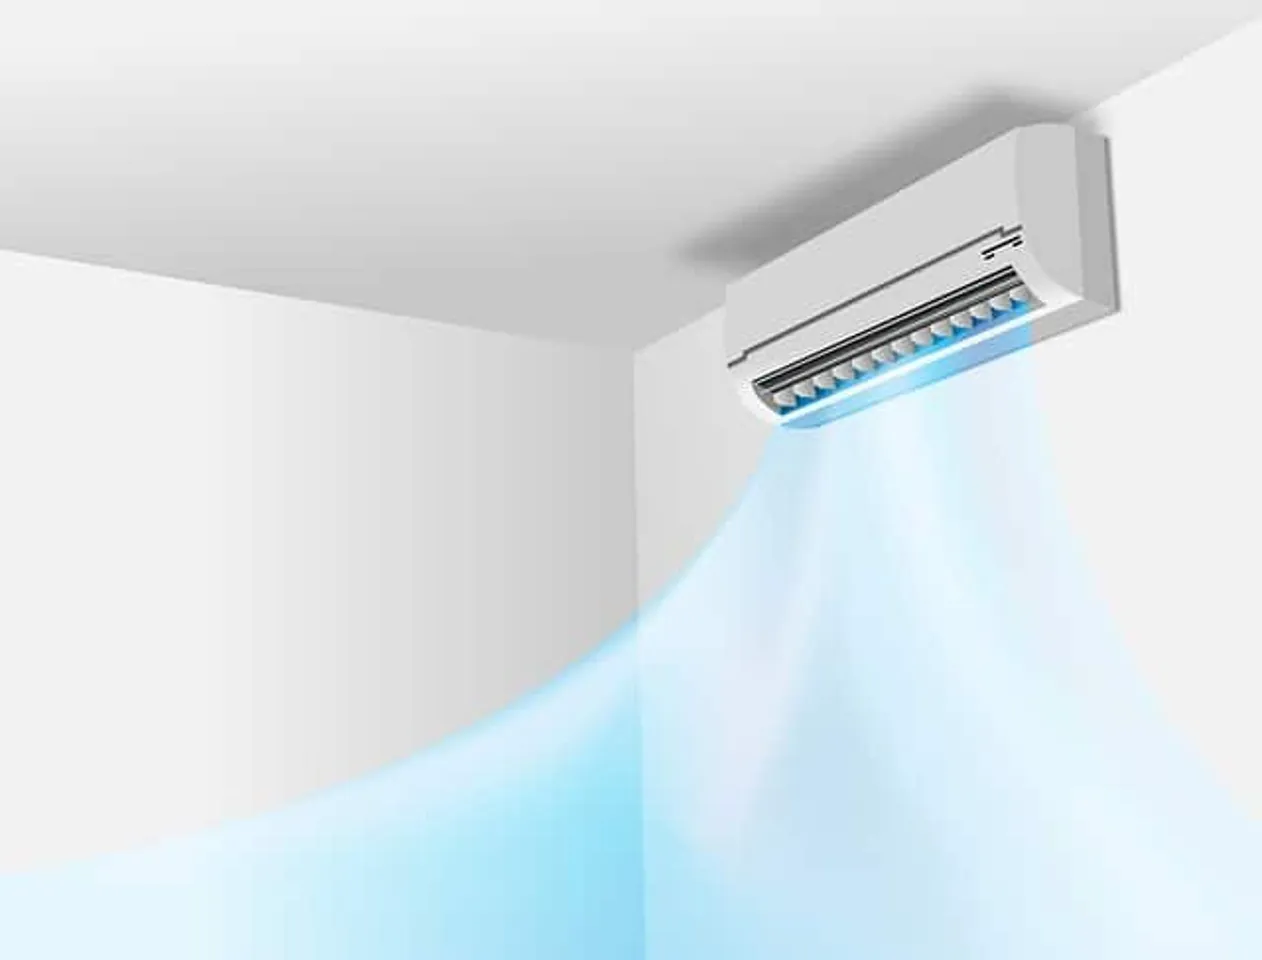 Room air conditioners